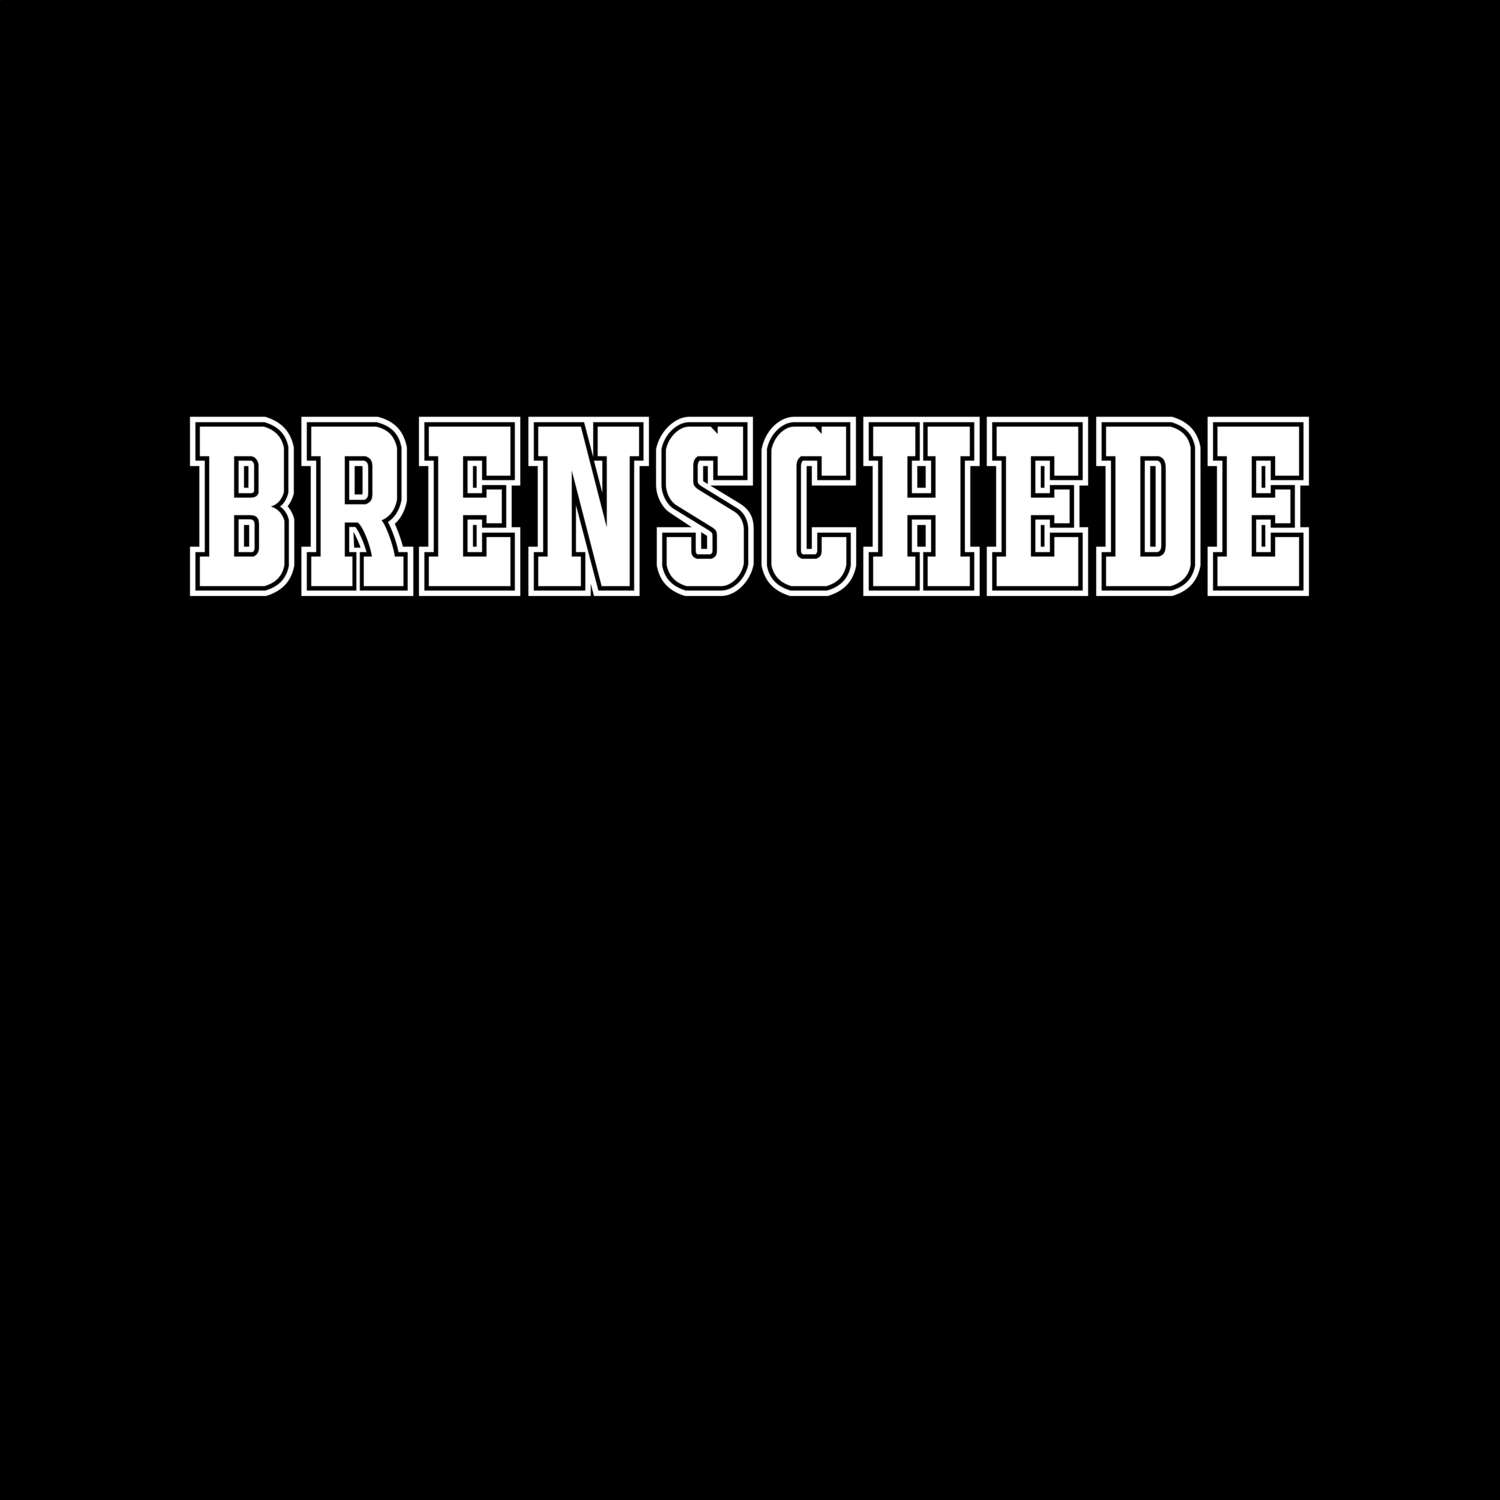 Brenschede T-Shirt »Classic«